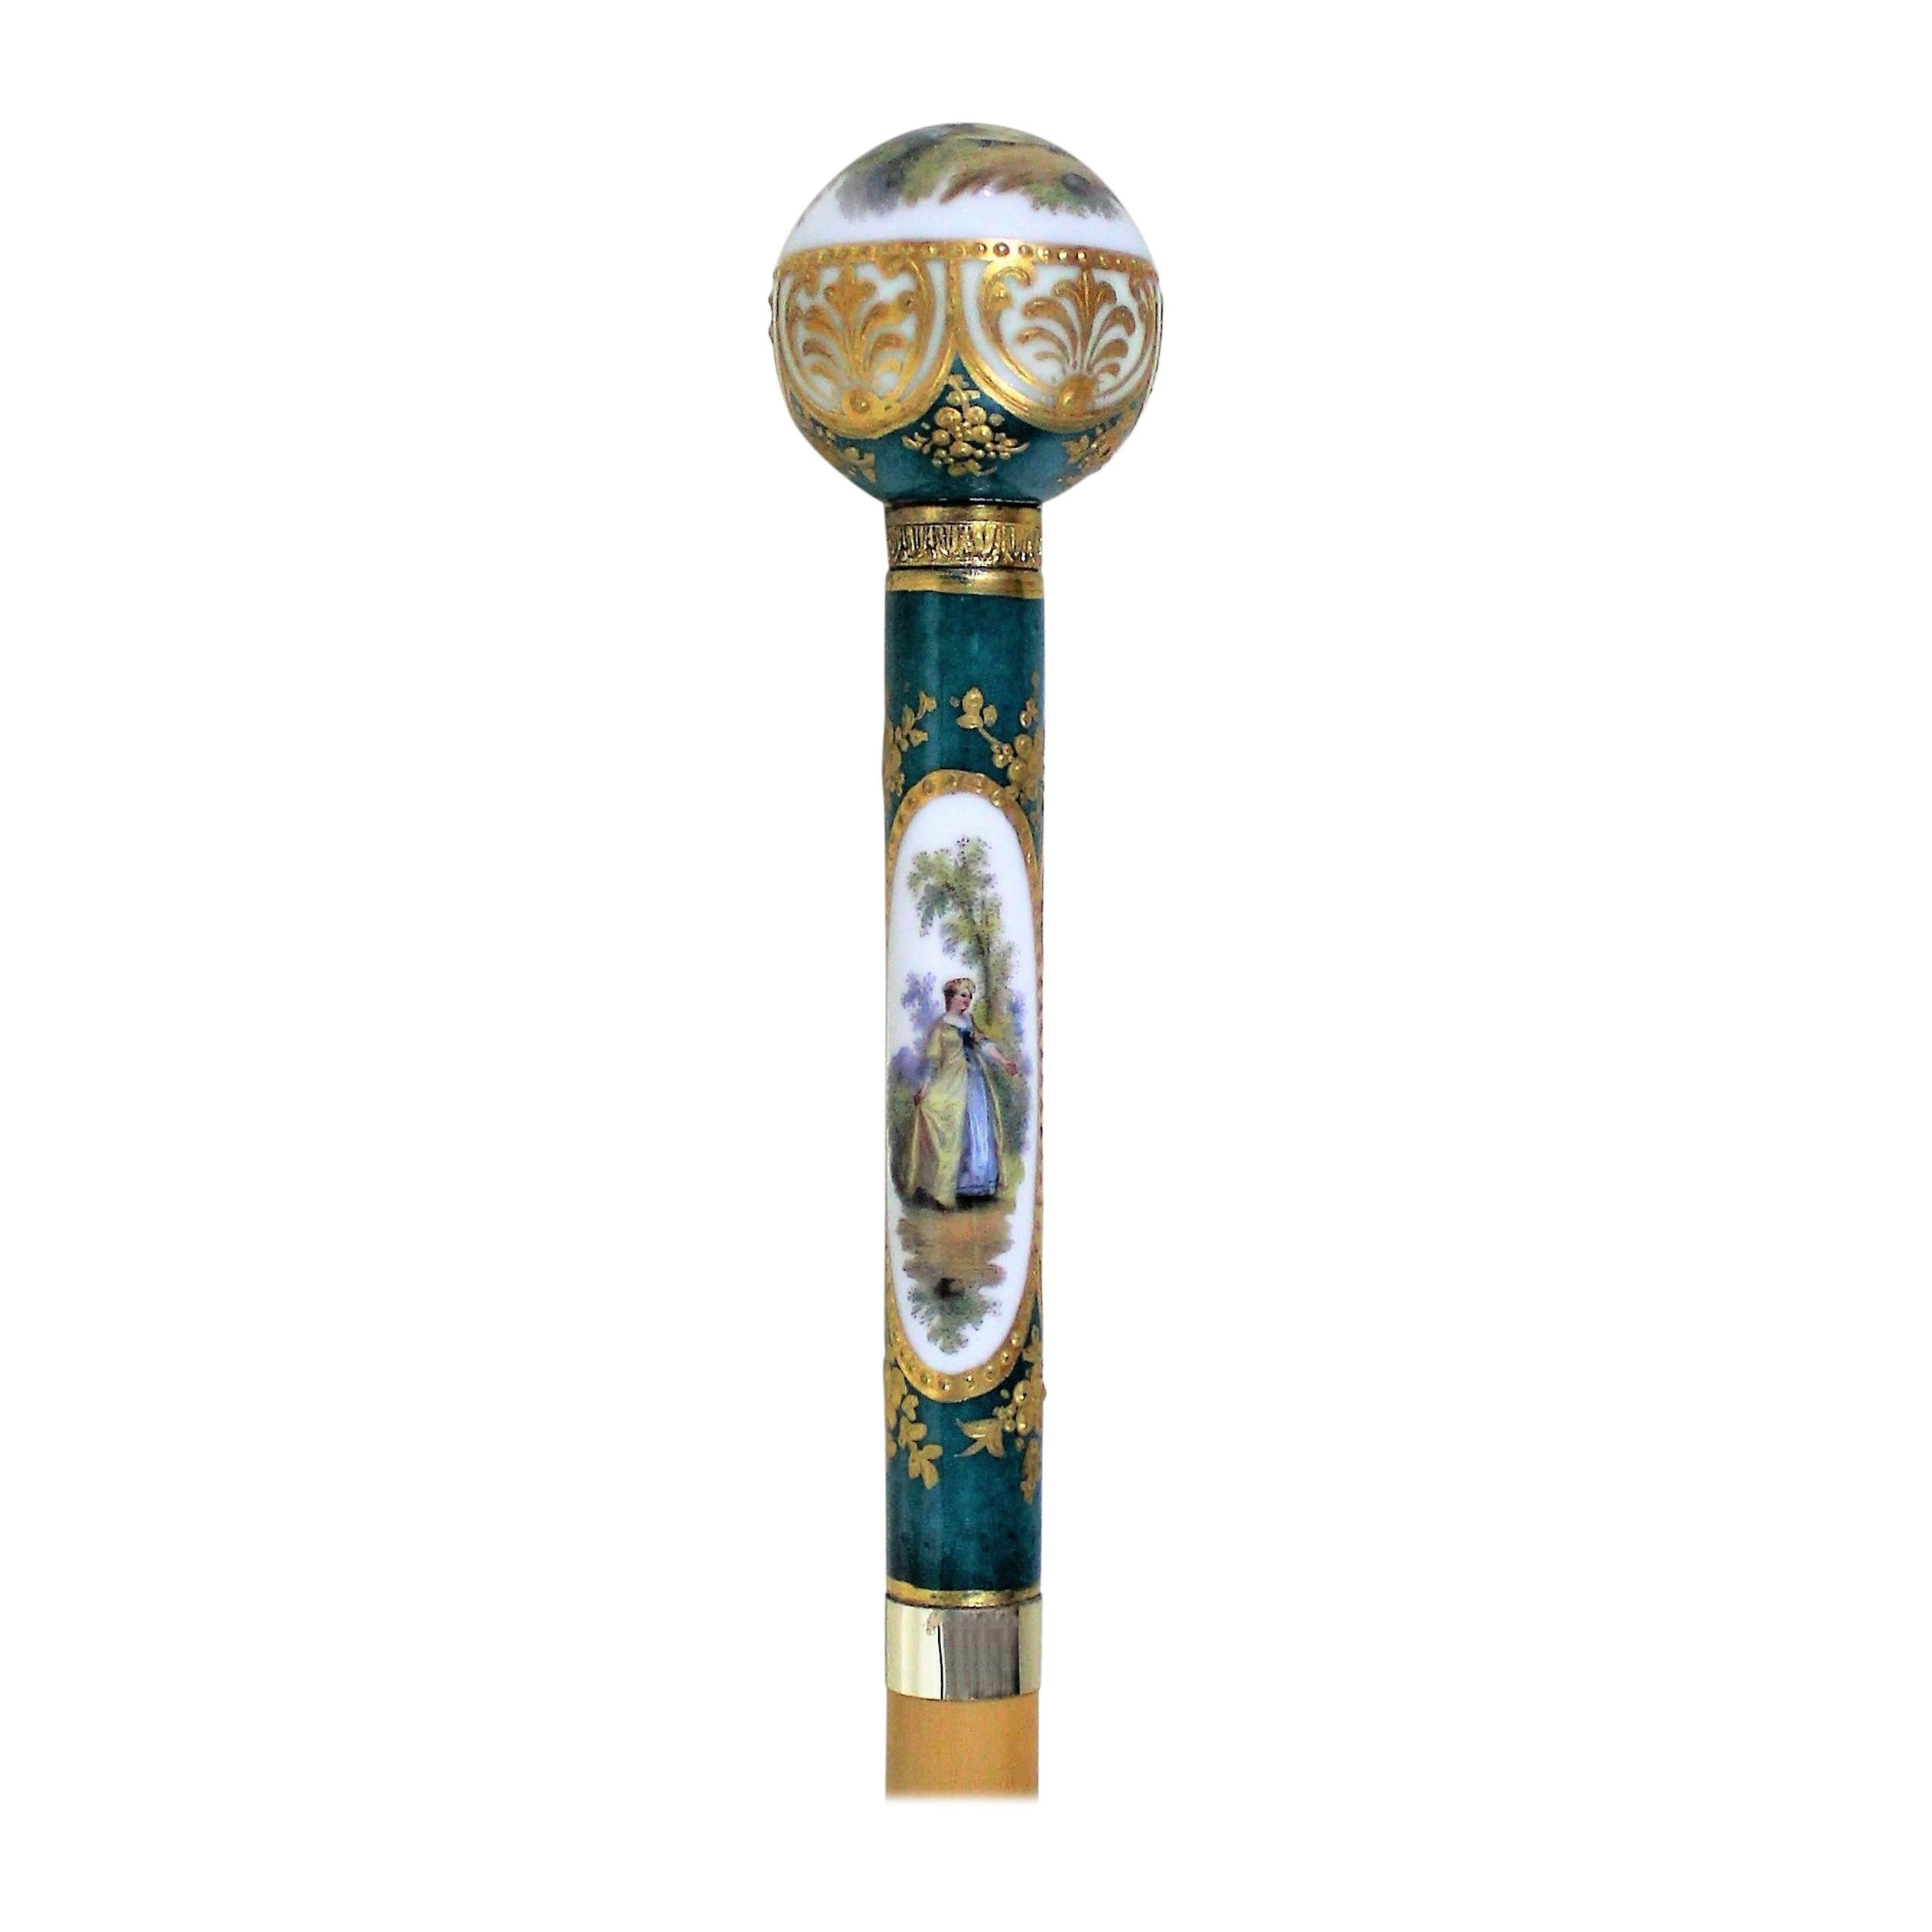 Lady's French Porcelain Sevres Style Walking Stick Cane